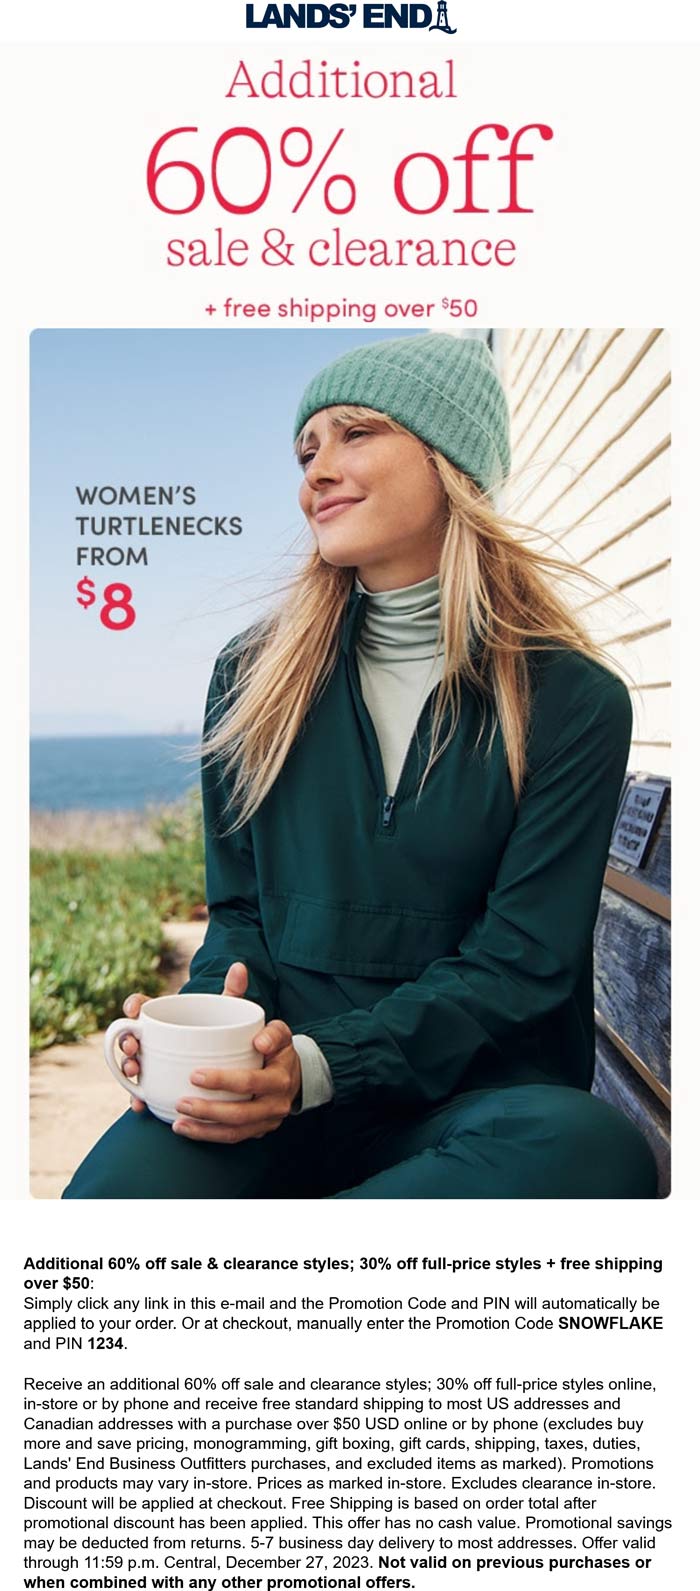 $8 turtlenecks + extra 60% off sale & clearance items today at Lands End via promo code SNOWFLAKE and pin 1234 #landsend